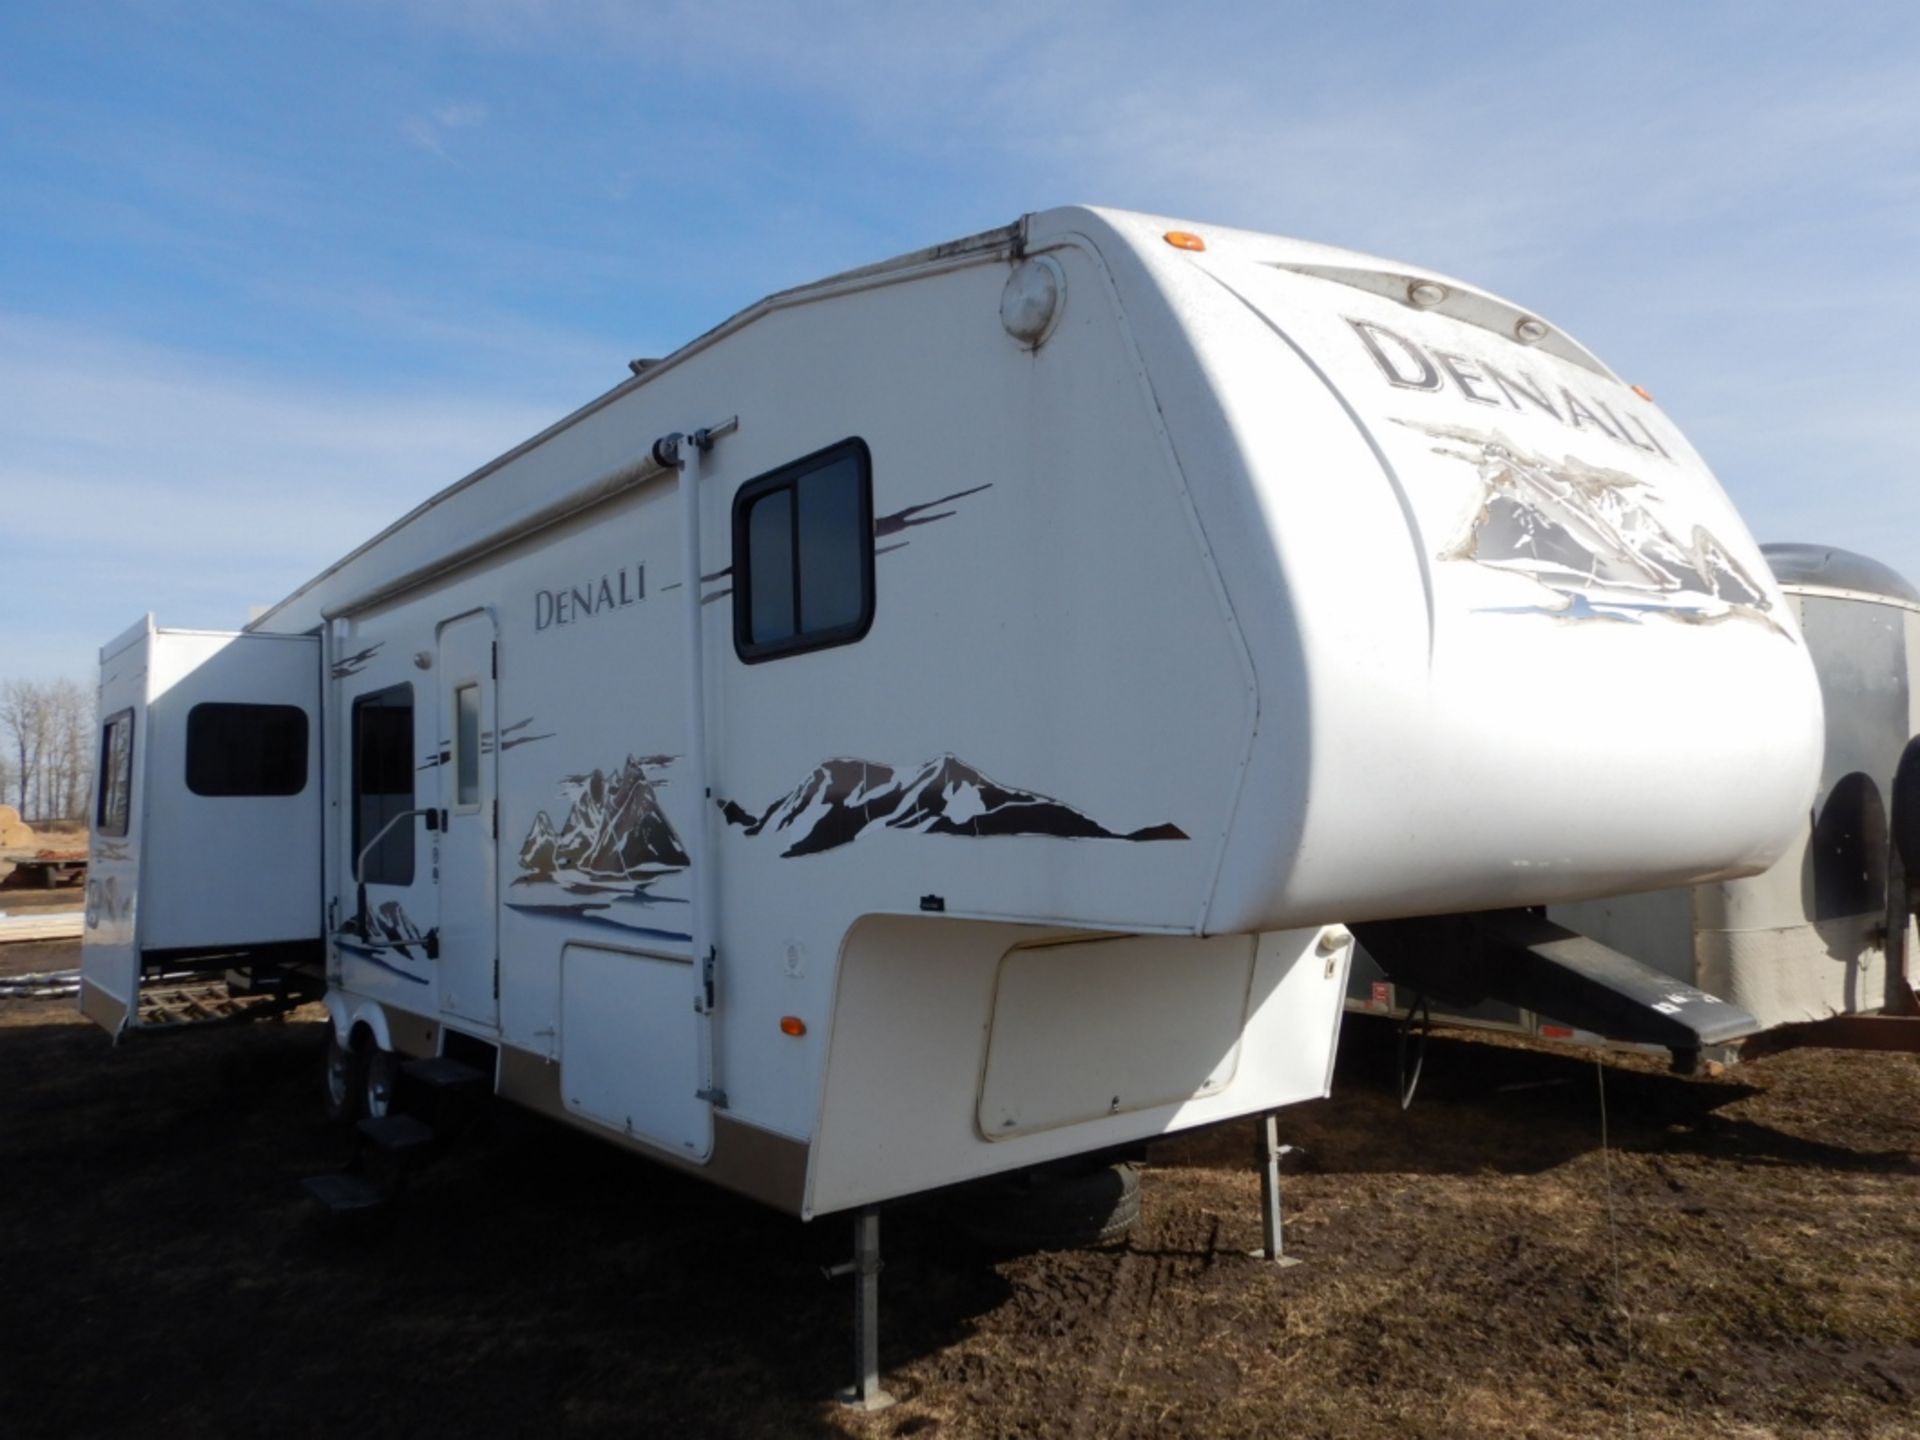 2006 DUTCHMEN DENALI 31RGBS/M5 5W HOLIDAY RV TRAILER S/N 47CFD1S226P616039 W/3-SLIDE-OUTS, AWNING, - Image 2 of 16